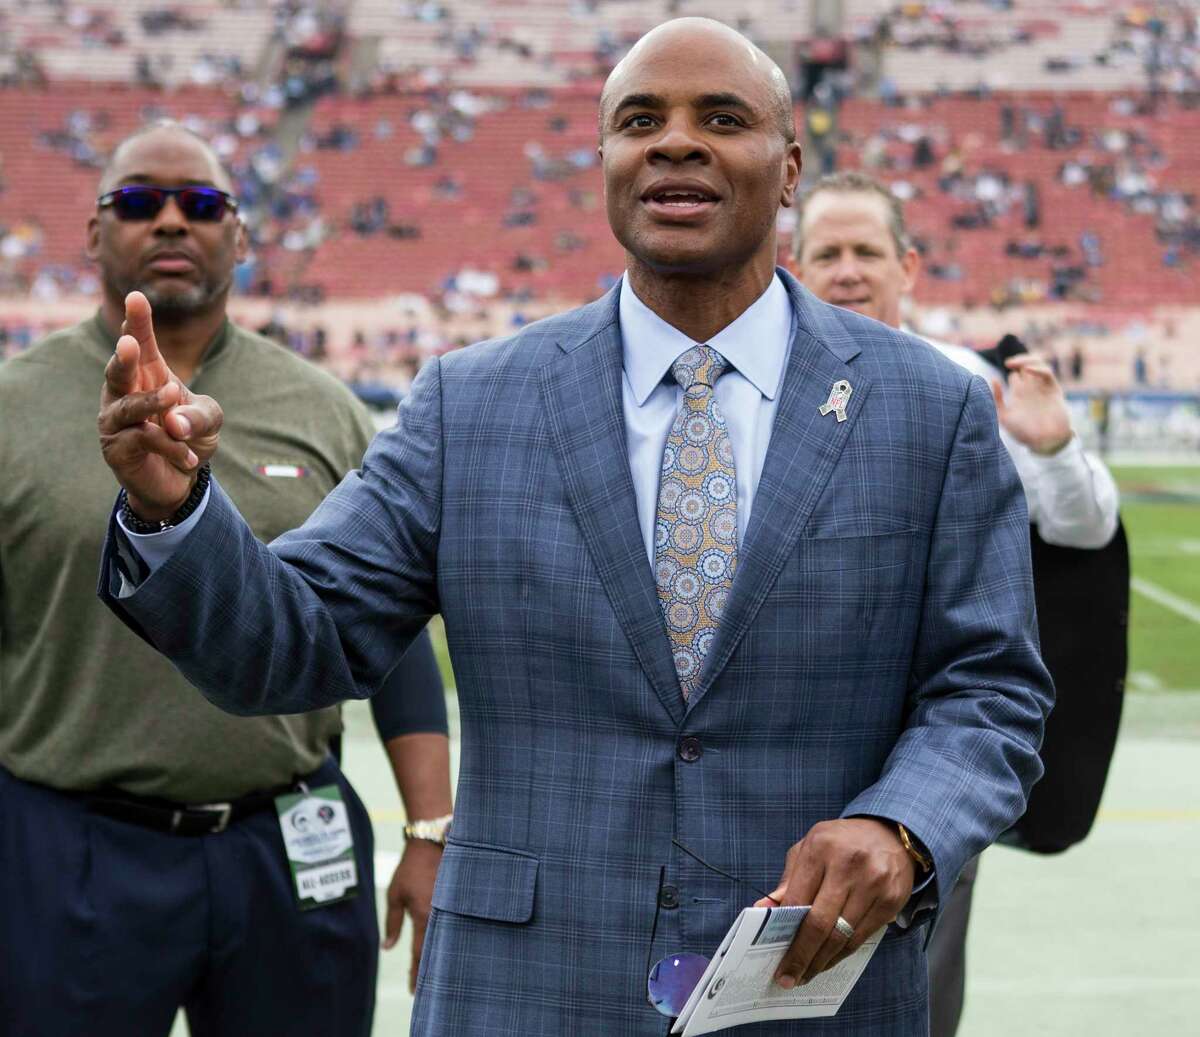 Houston Texans general manager Rick Smith waves to a fan in the stands before an NFL football game against the Los Angeles Rams at the Los Angeles Memorial Coliseum on Sunday, Nov. 12, 2017, in Los Angeles. ( Brett Coomer / Houston Chronicle )